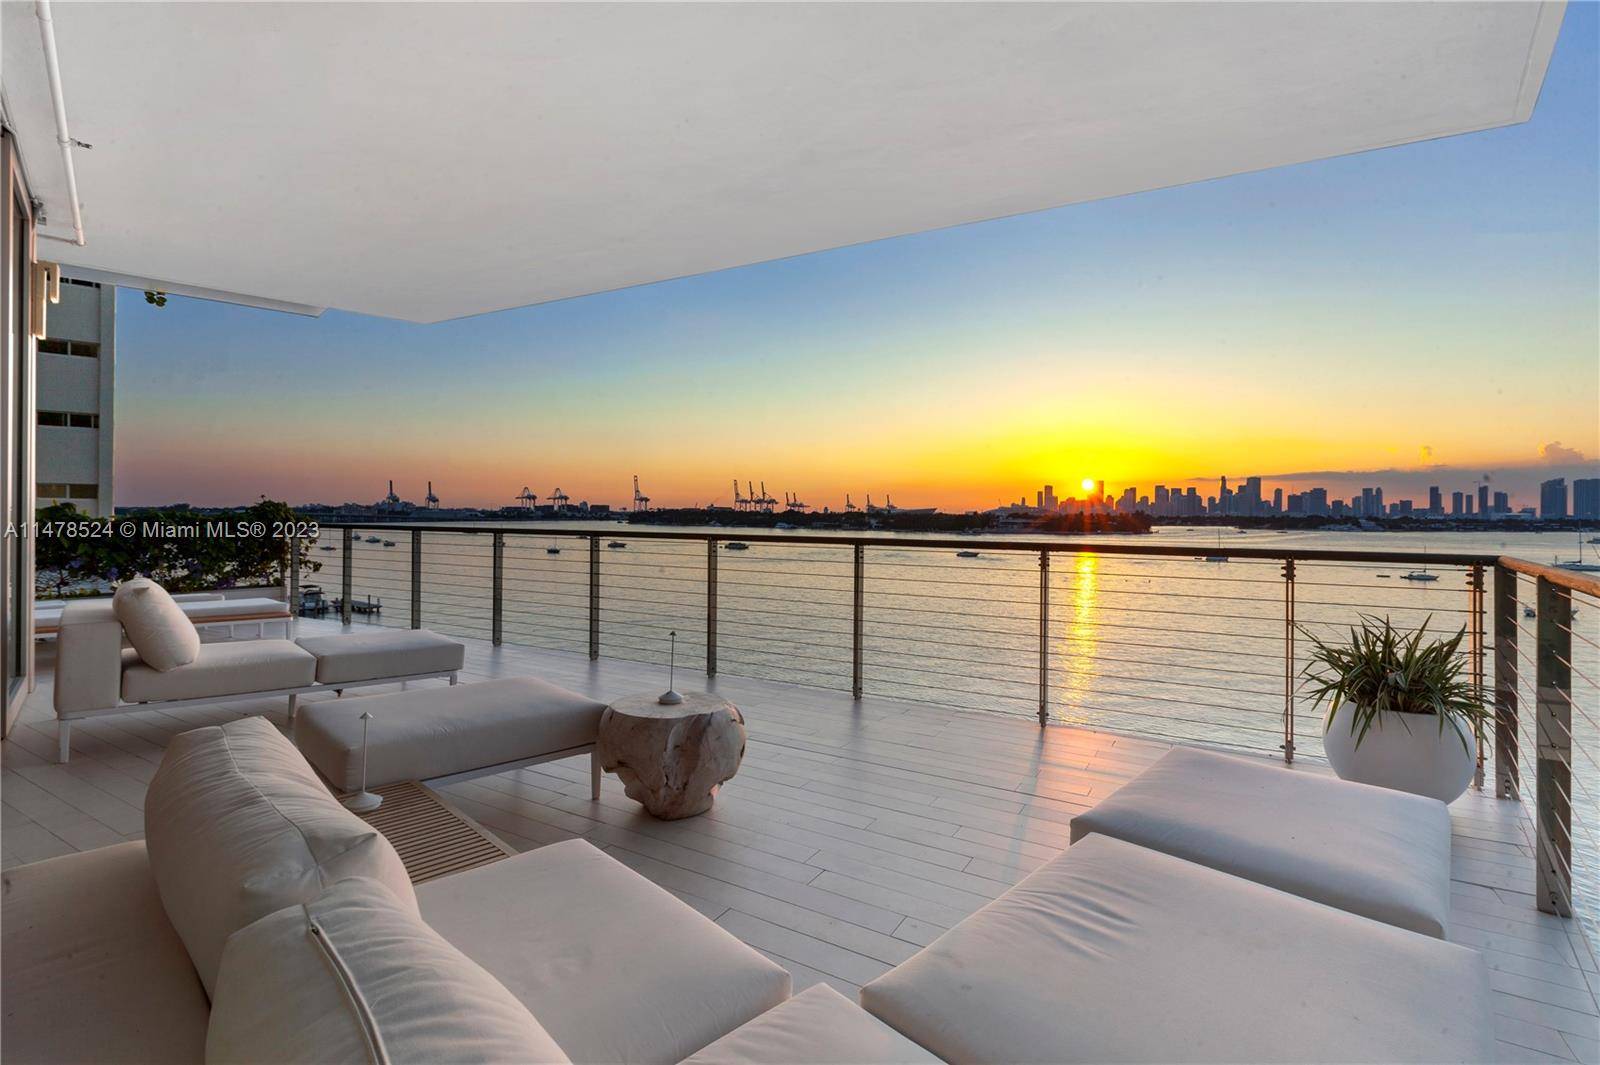 The best sunset views of the Biscayne Bay.